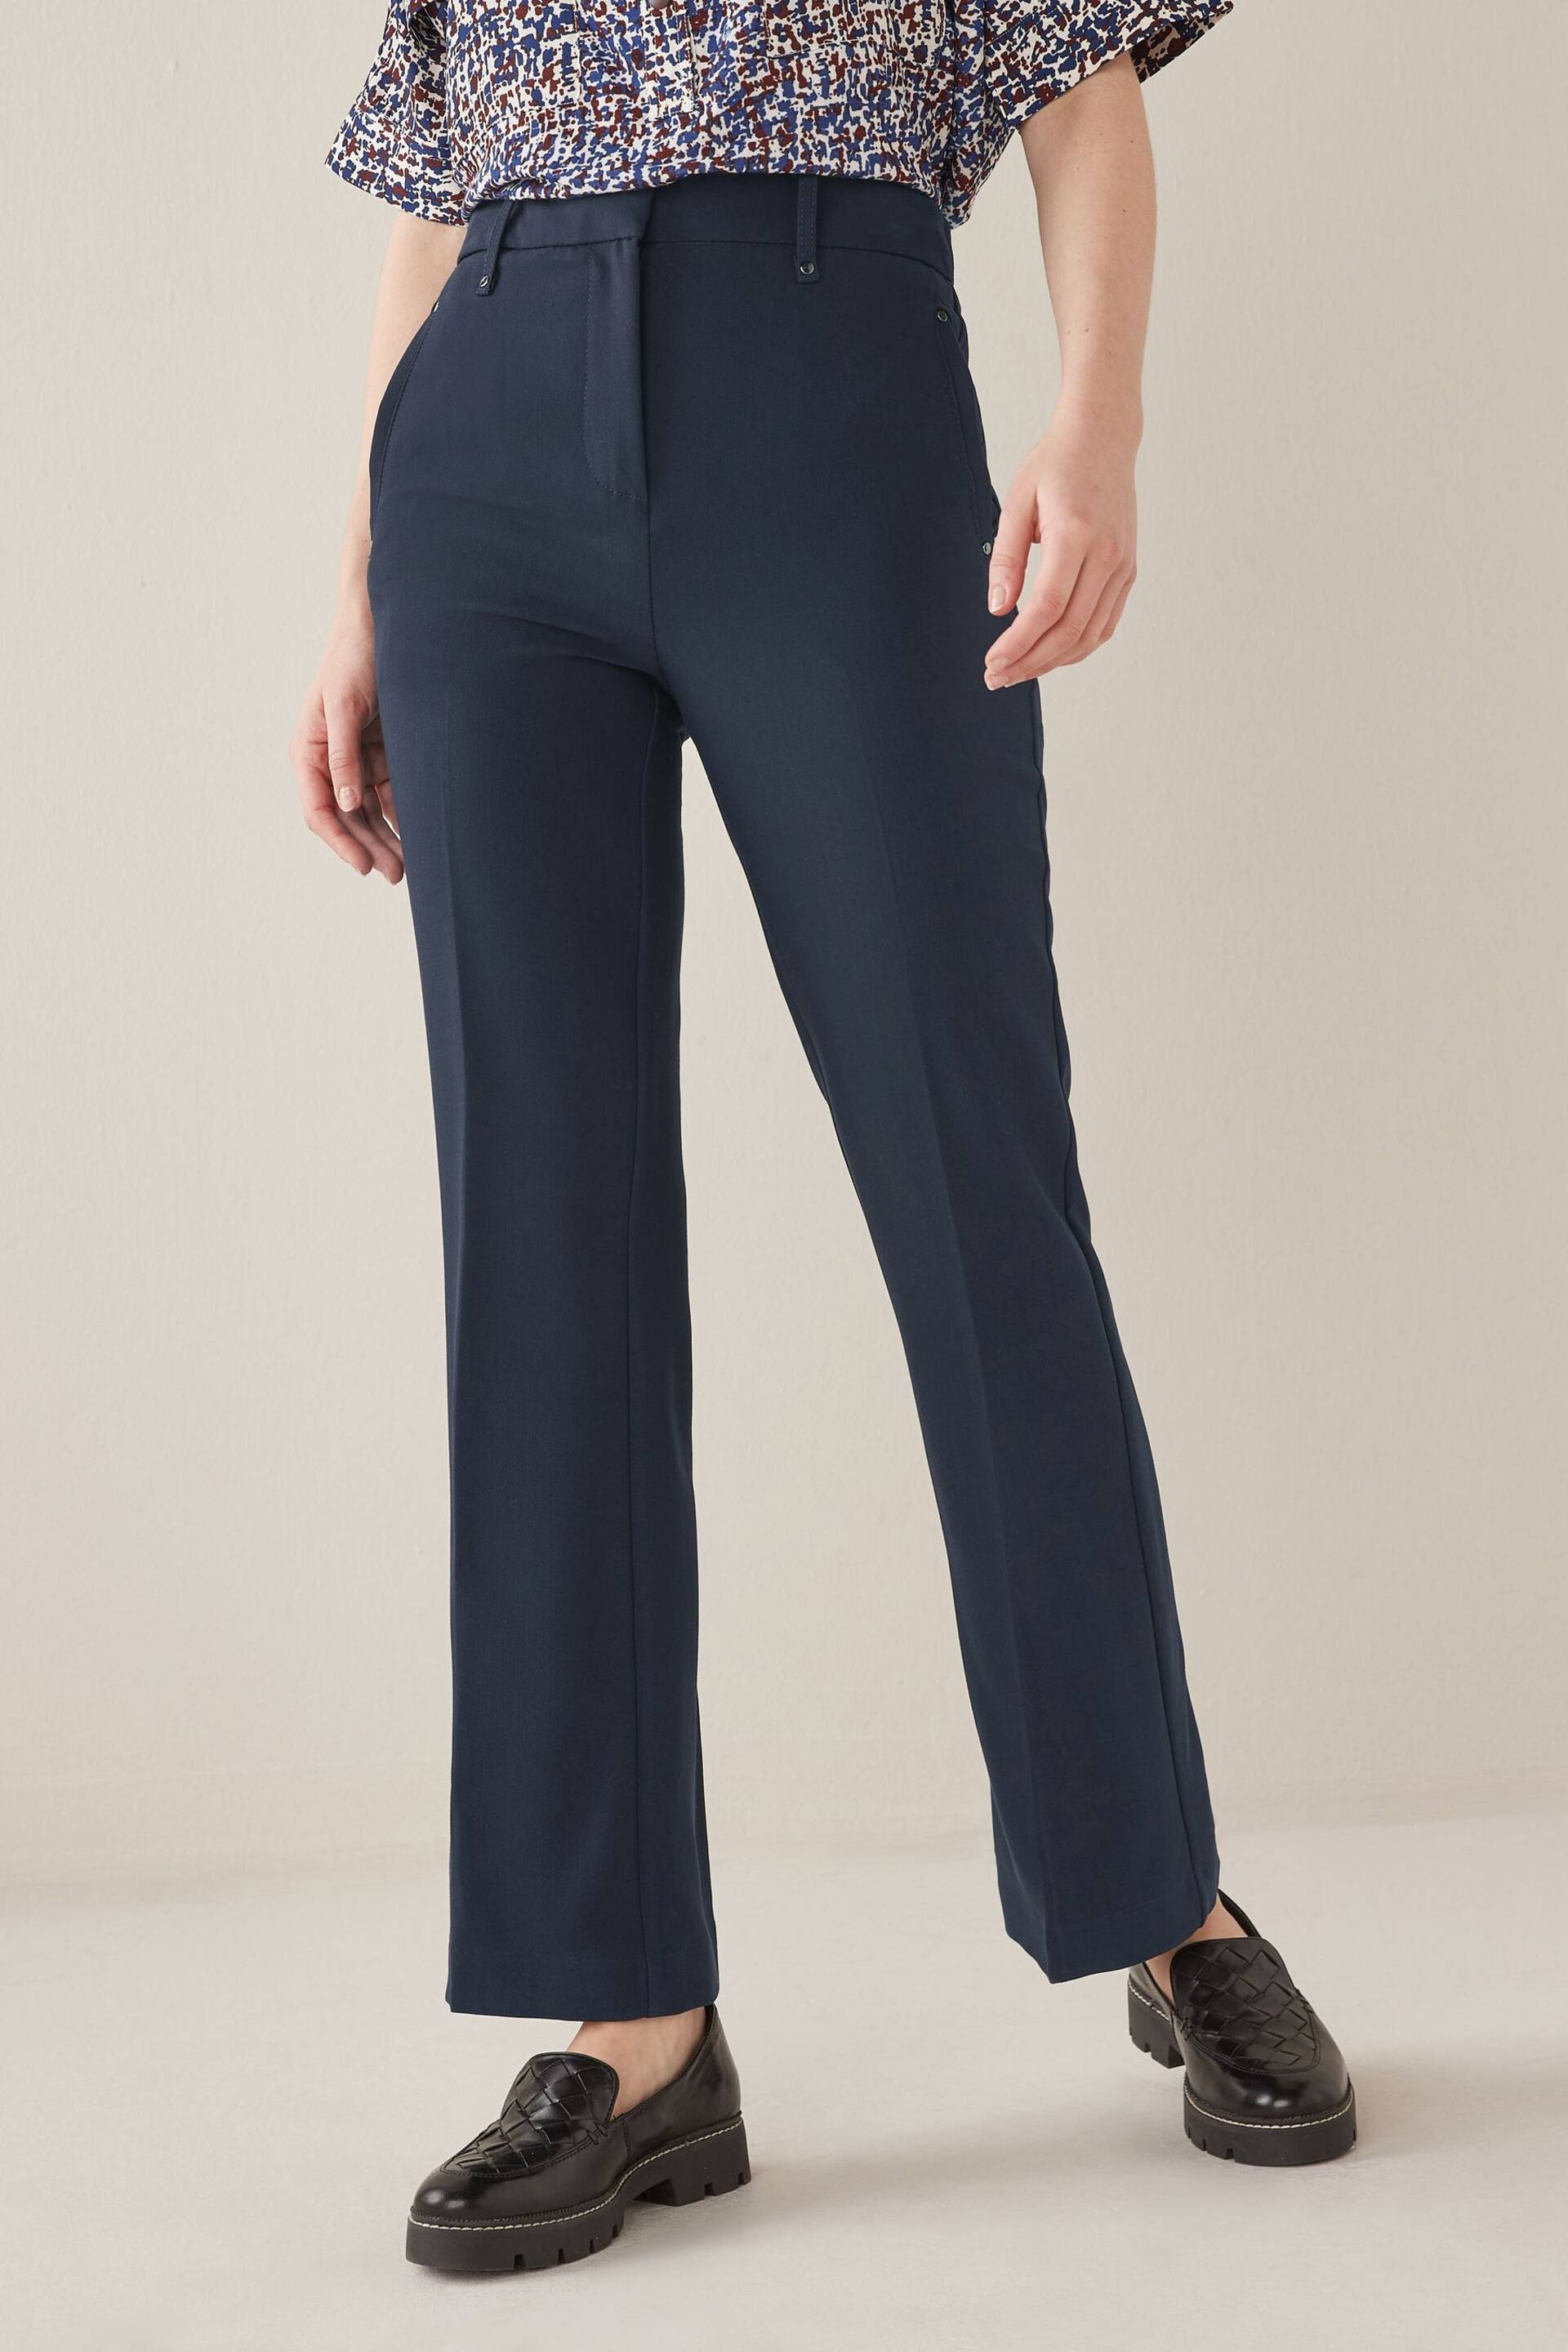 Navy Blue Tailored Elasticated Back Boot Cut Trousers - Image 1 of 5